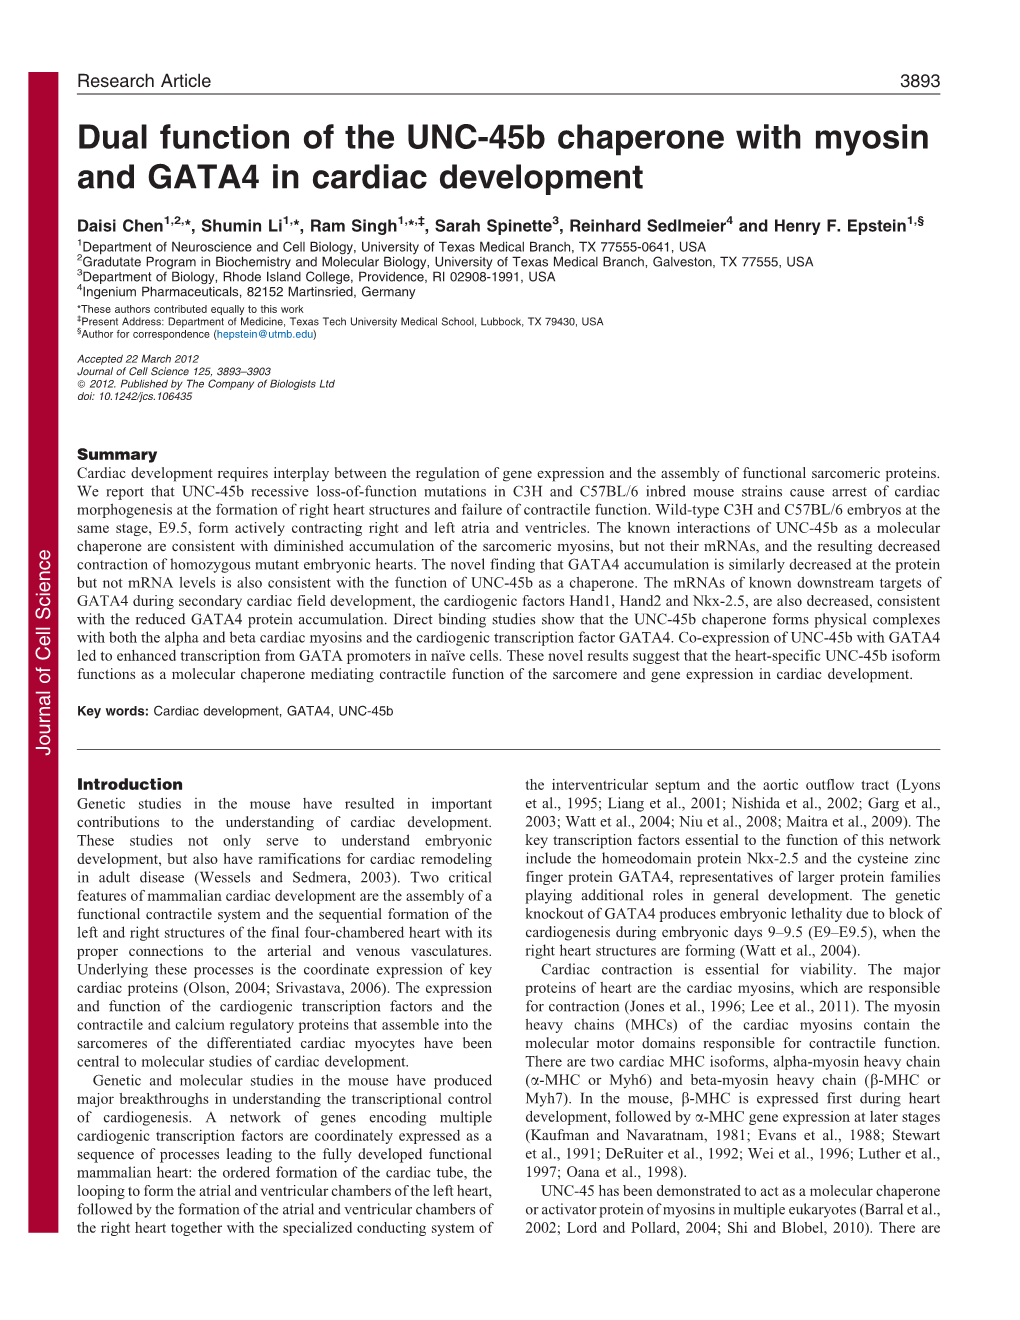 Dual Function of the UNC-45B Chaperone with Myosin and GATA4 in Cardiac Development